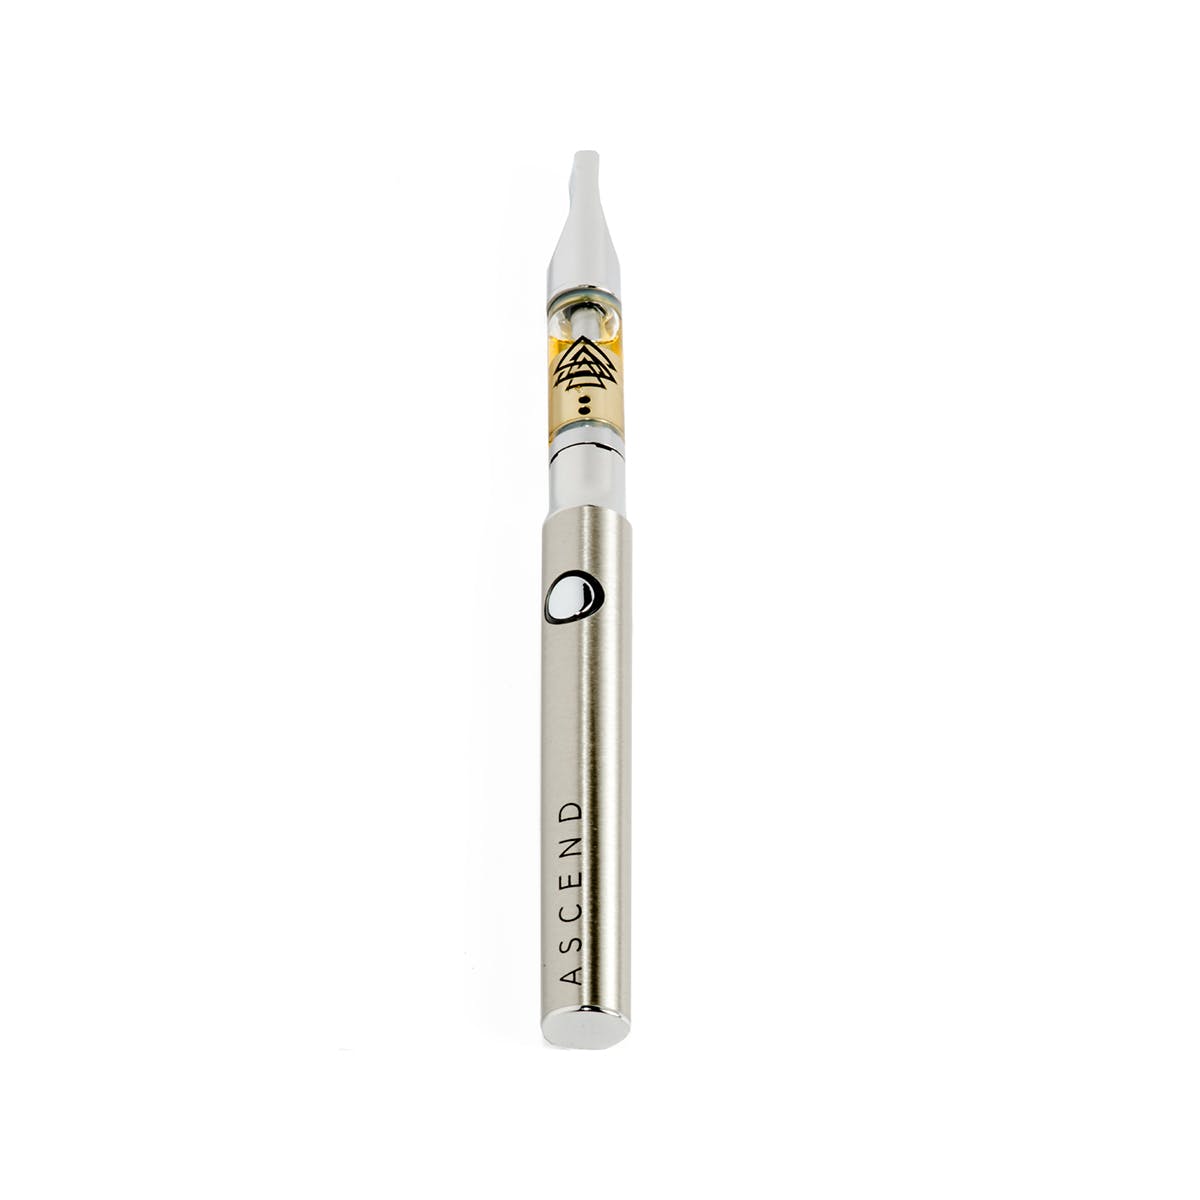 concentrate-ascend-relax-vape-cartridge